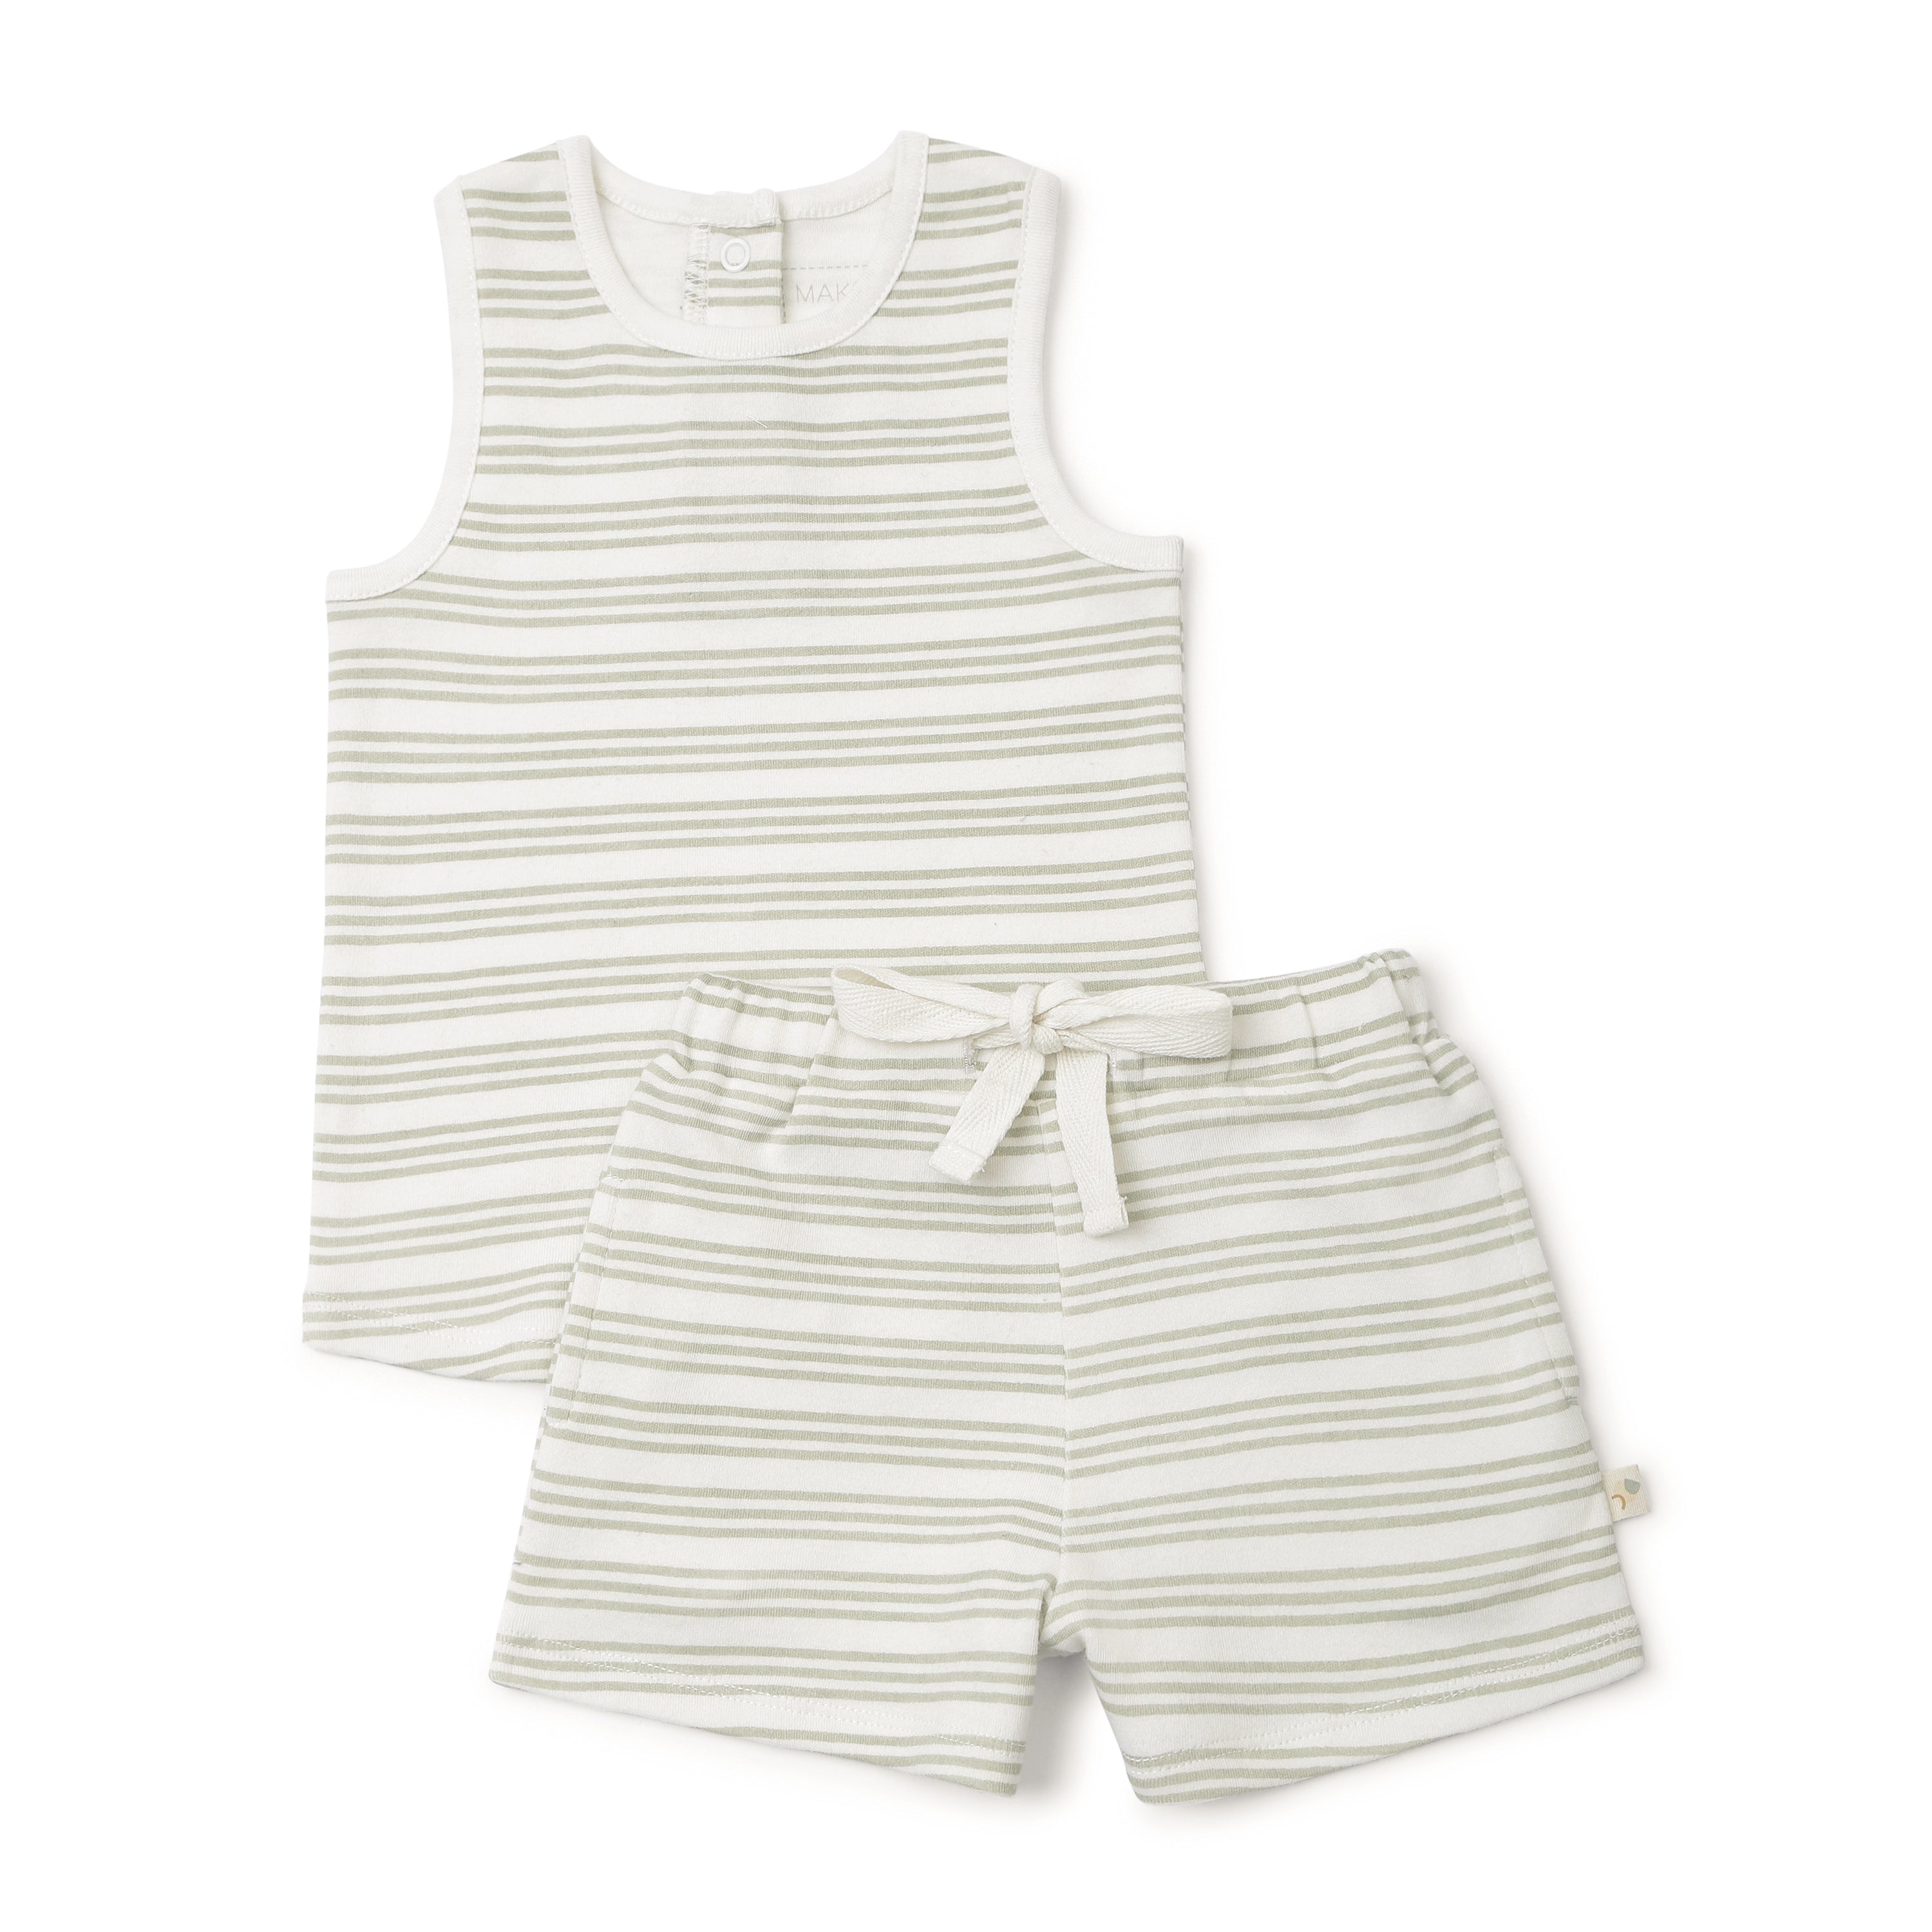 A matching children's outfit by Organic Kids consisting of a sleeveless striped tank top and shorts in cream and light green colors, displayed on a plain white background.